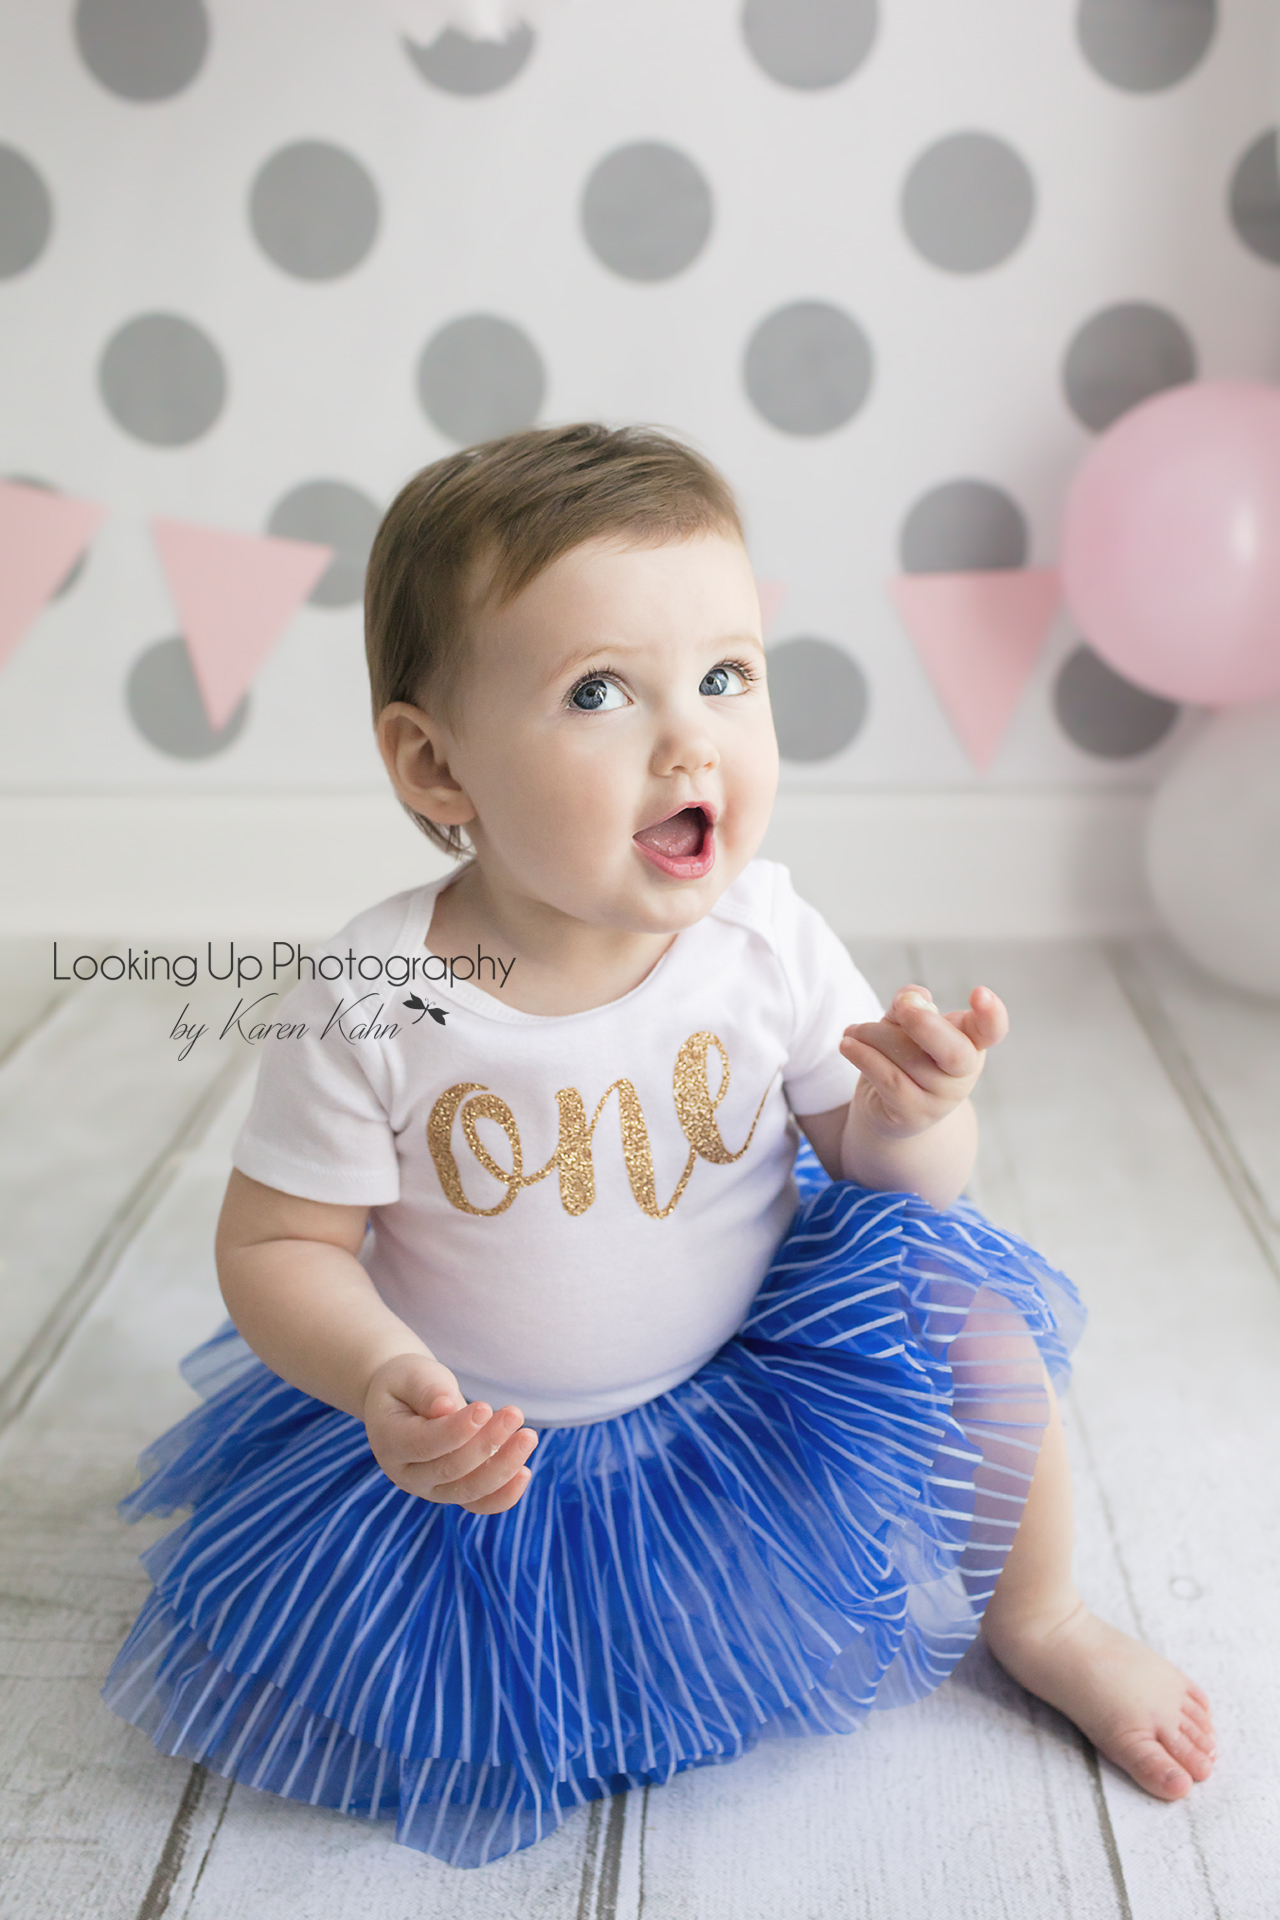 Laughing cutie pie in gold and blue tutu cake smash session for 12 month portrait baby girl looking sweet with gray polka dots for one year old milestone